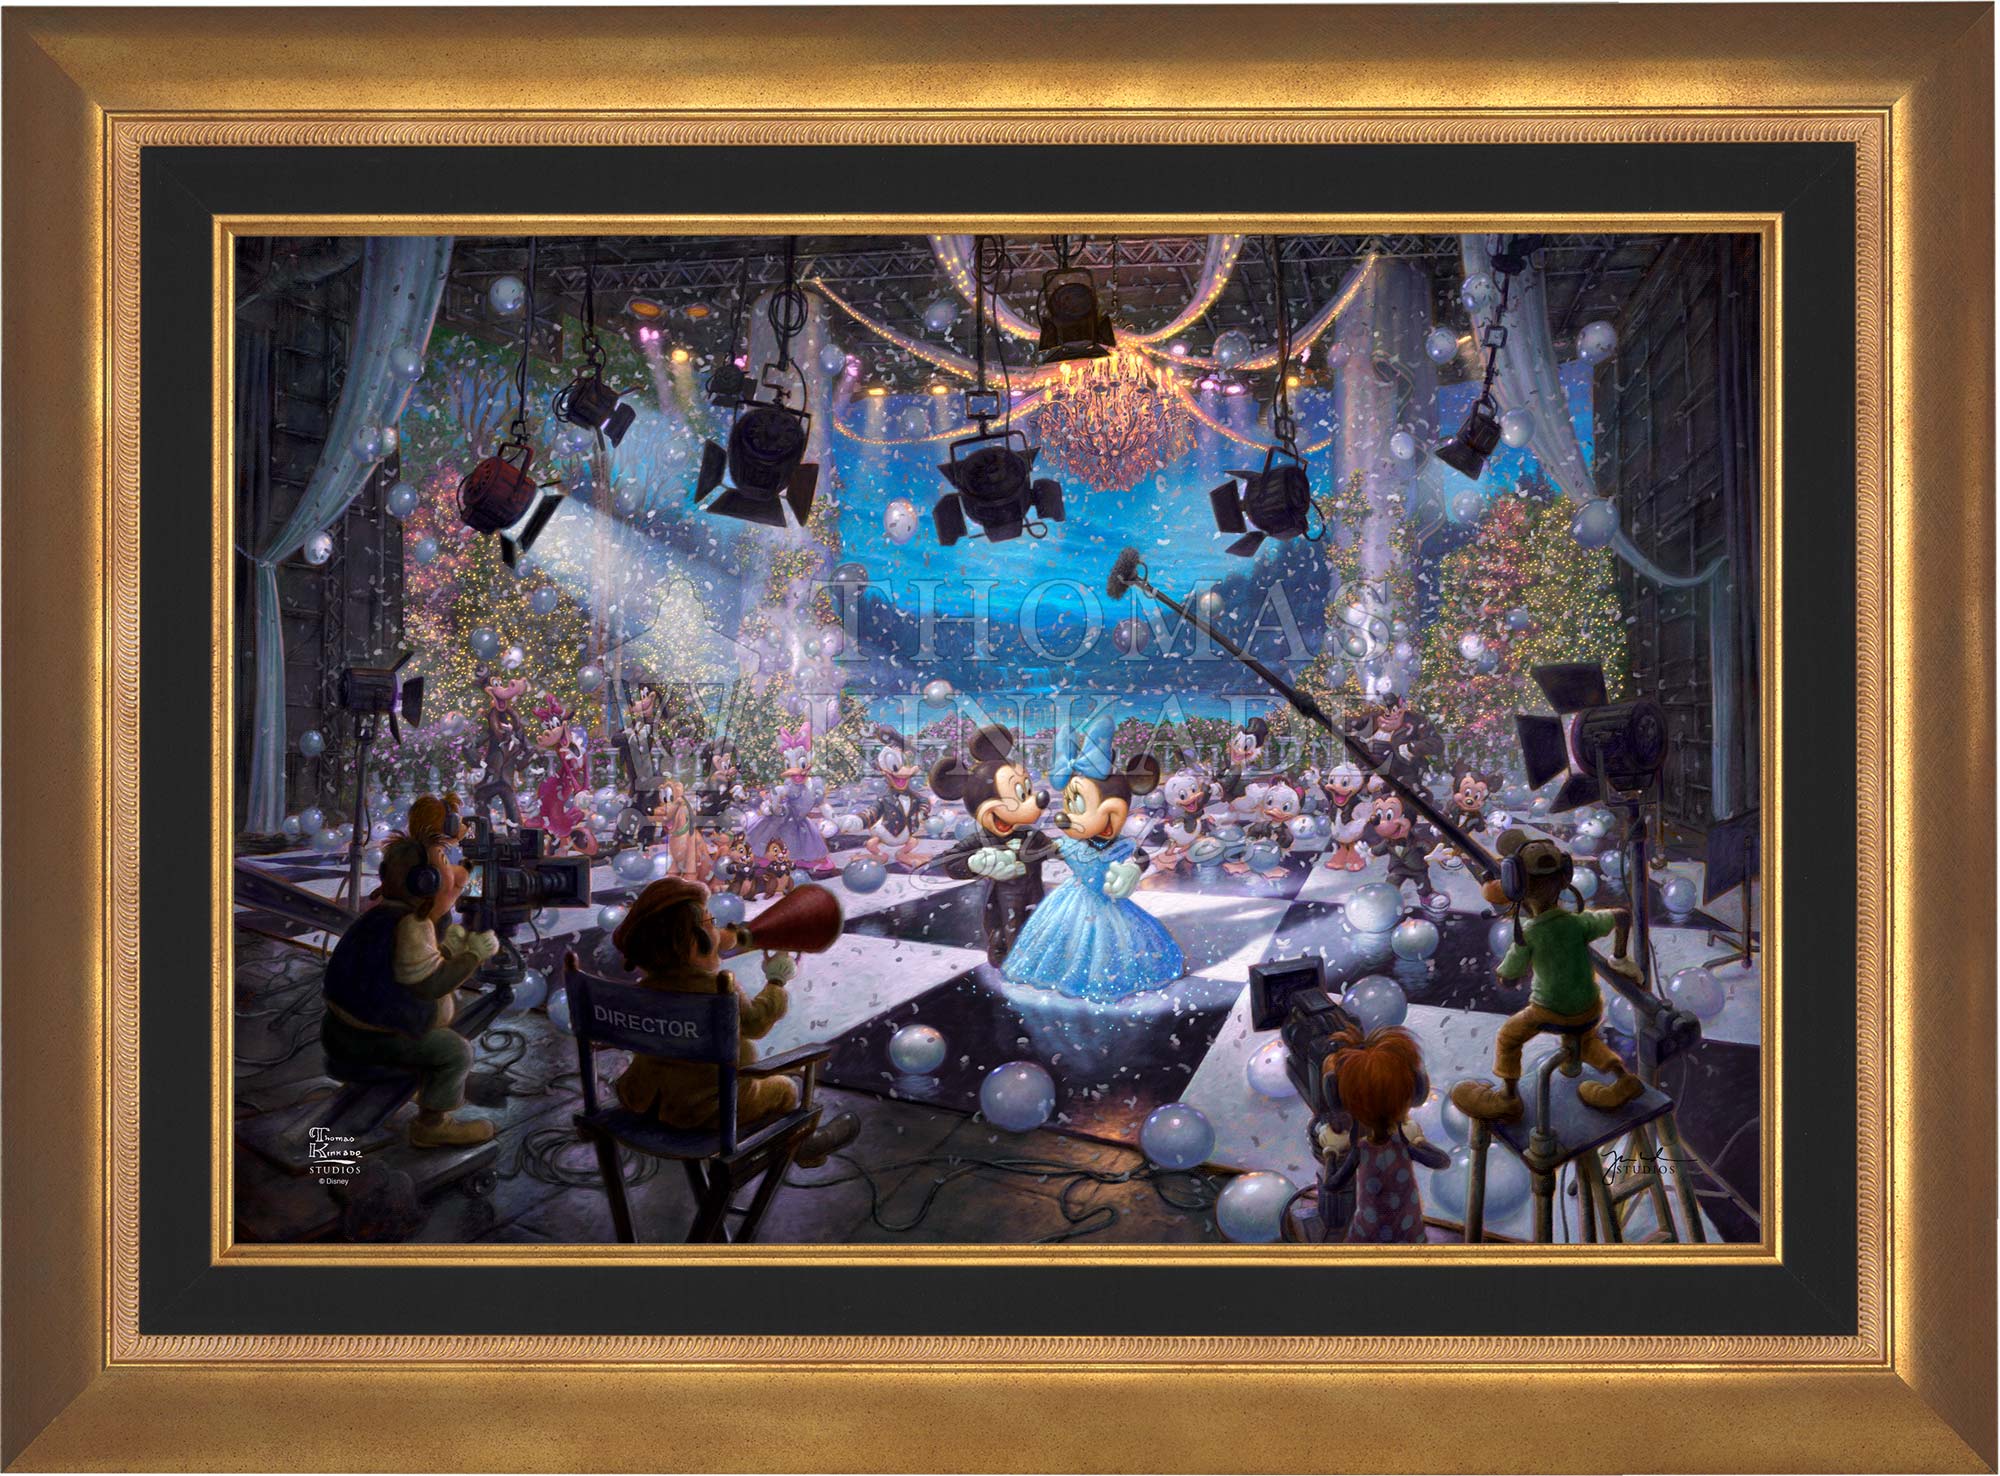 Aesthetic Thomas kinkade Disney Paint By Numbers - PBN Canvas